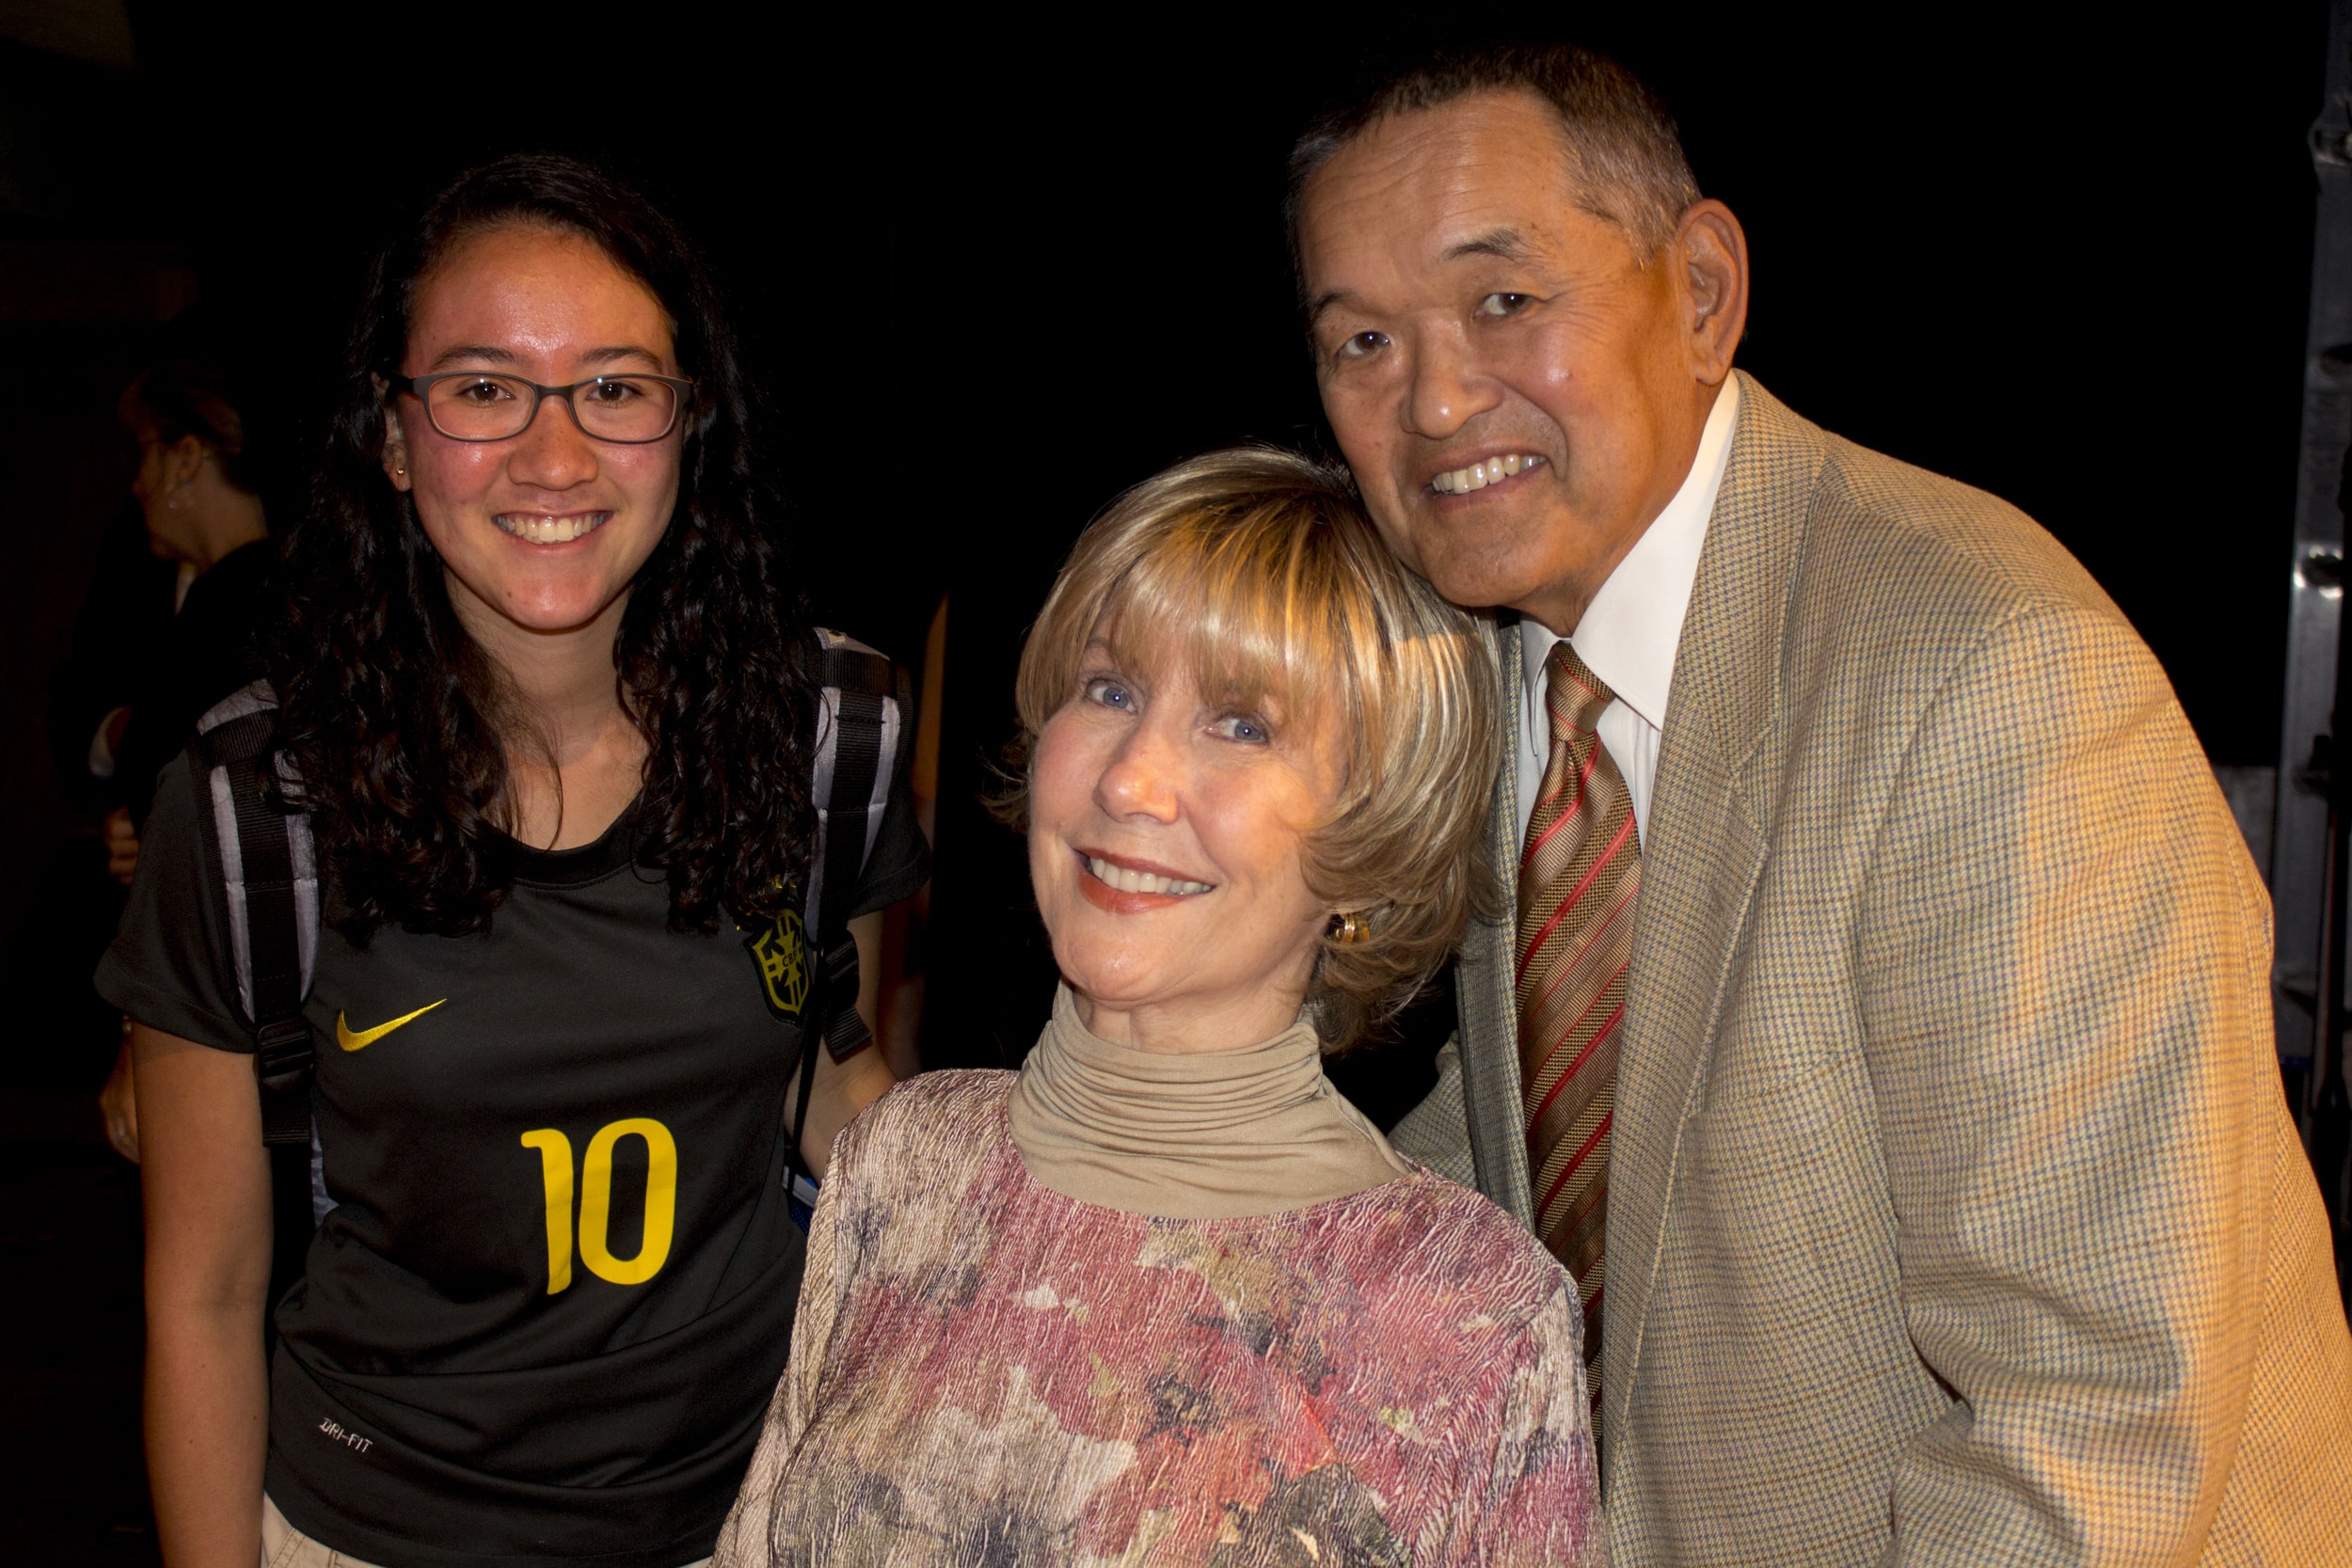 Joni Eareckson Tada spent time withs students after speaking at chapel, even posing for pictures, like sophomore Alisa Sandlin and Tada's husband, Ken.